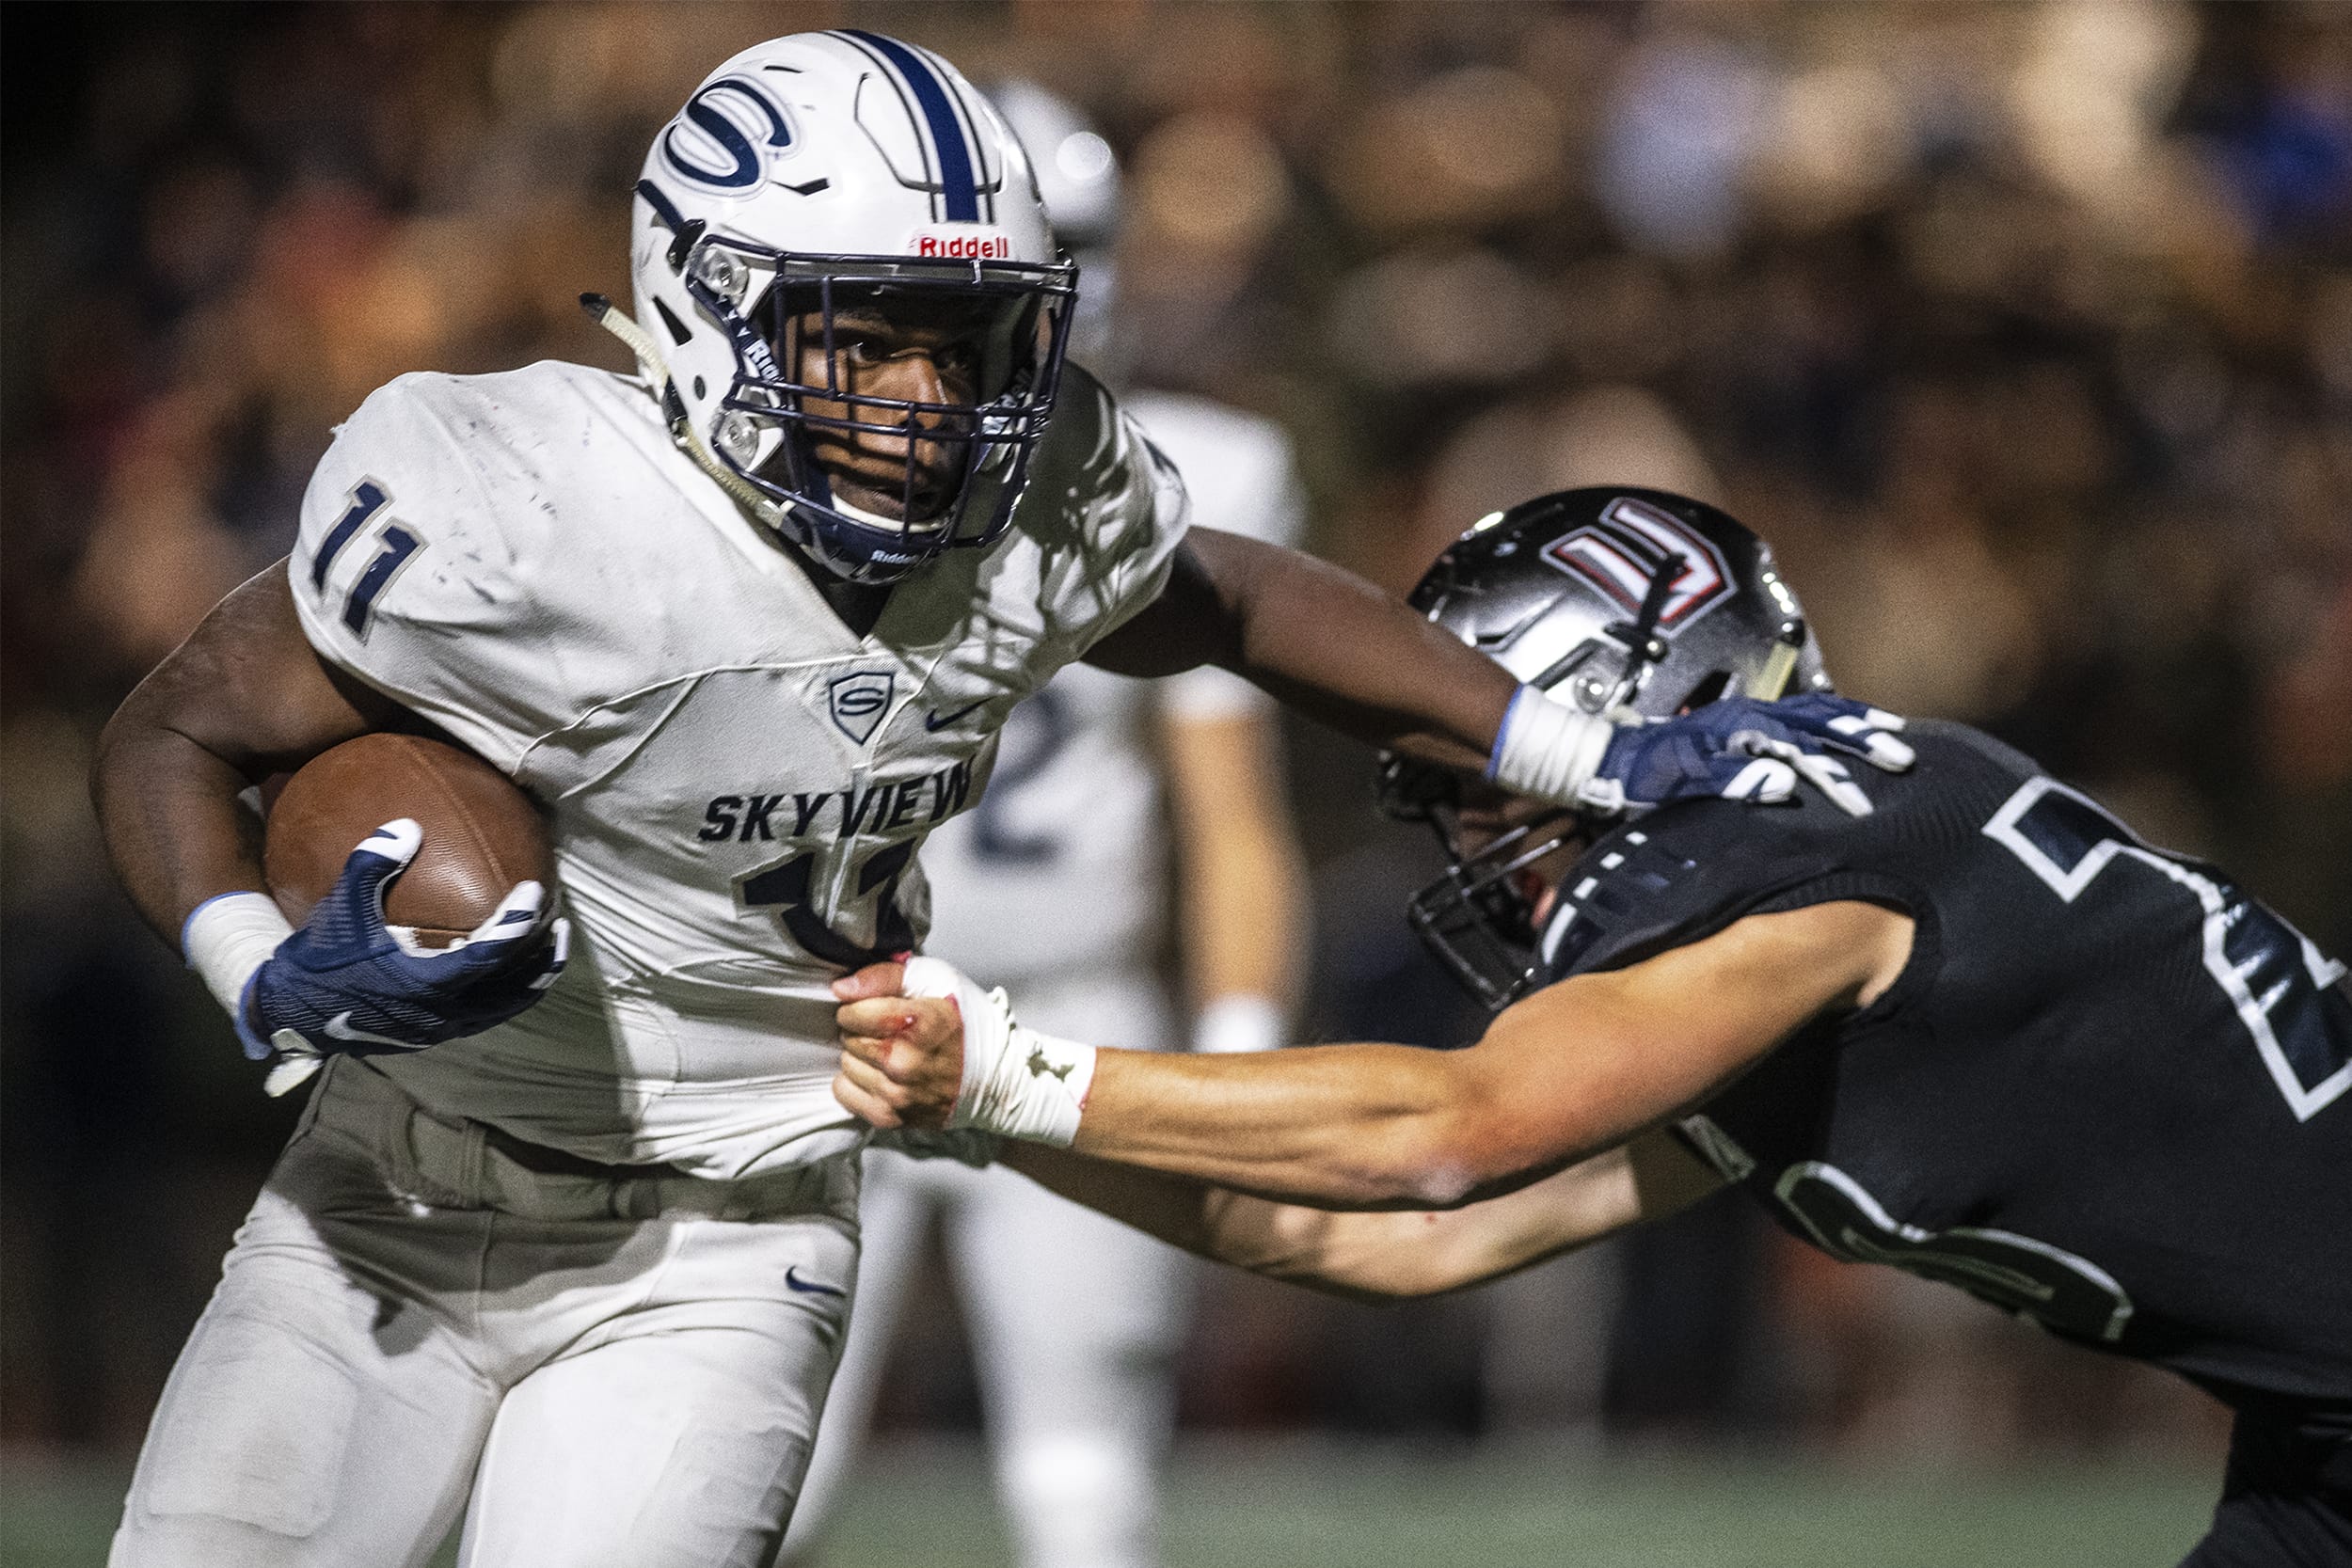 Skyview’s Jalynnee McGee breaks a tackle from a Union defender while running he ball in a game at McKenzie Stadium on Friday night, Oct. 11, 2019.